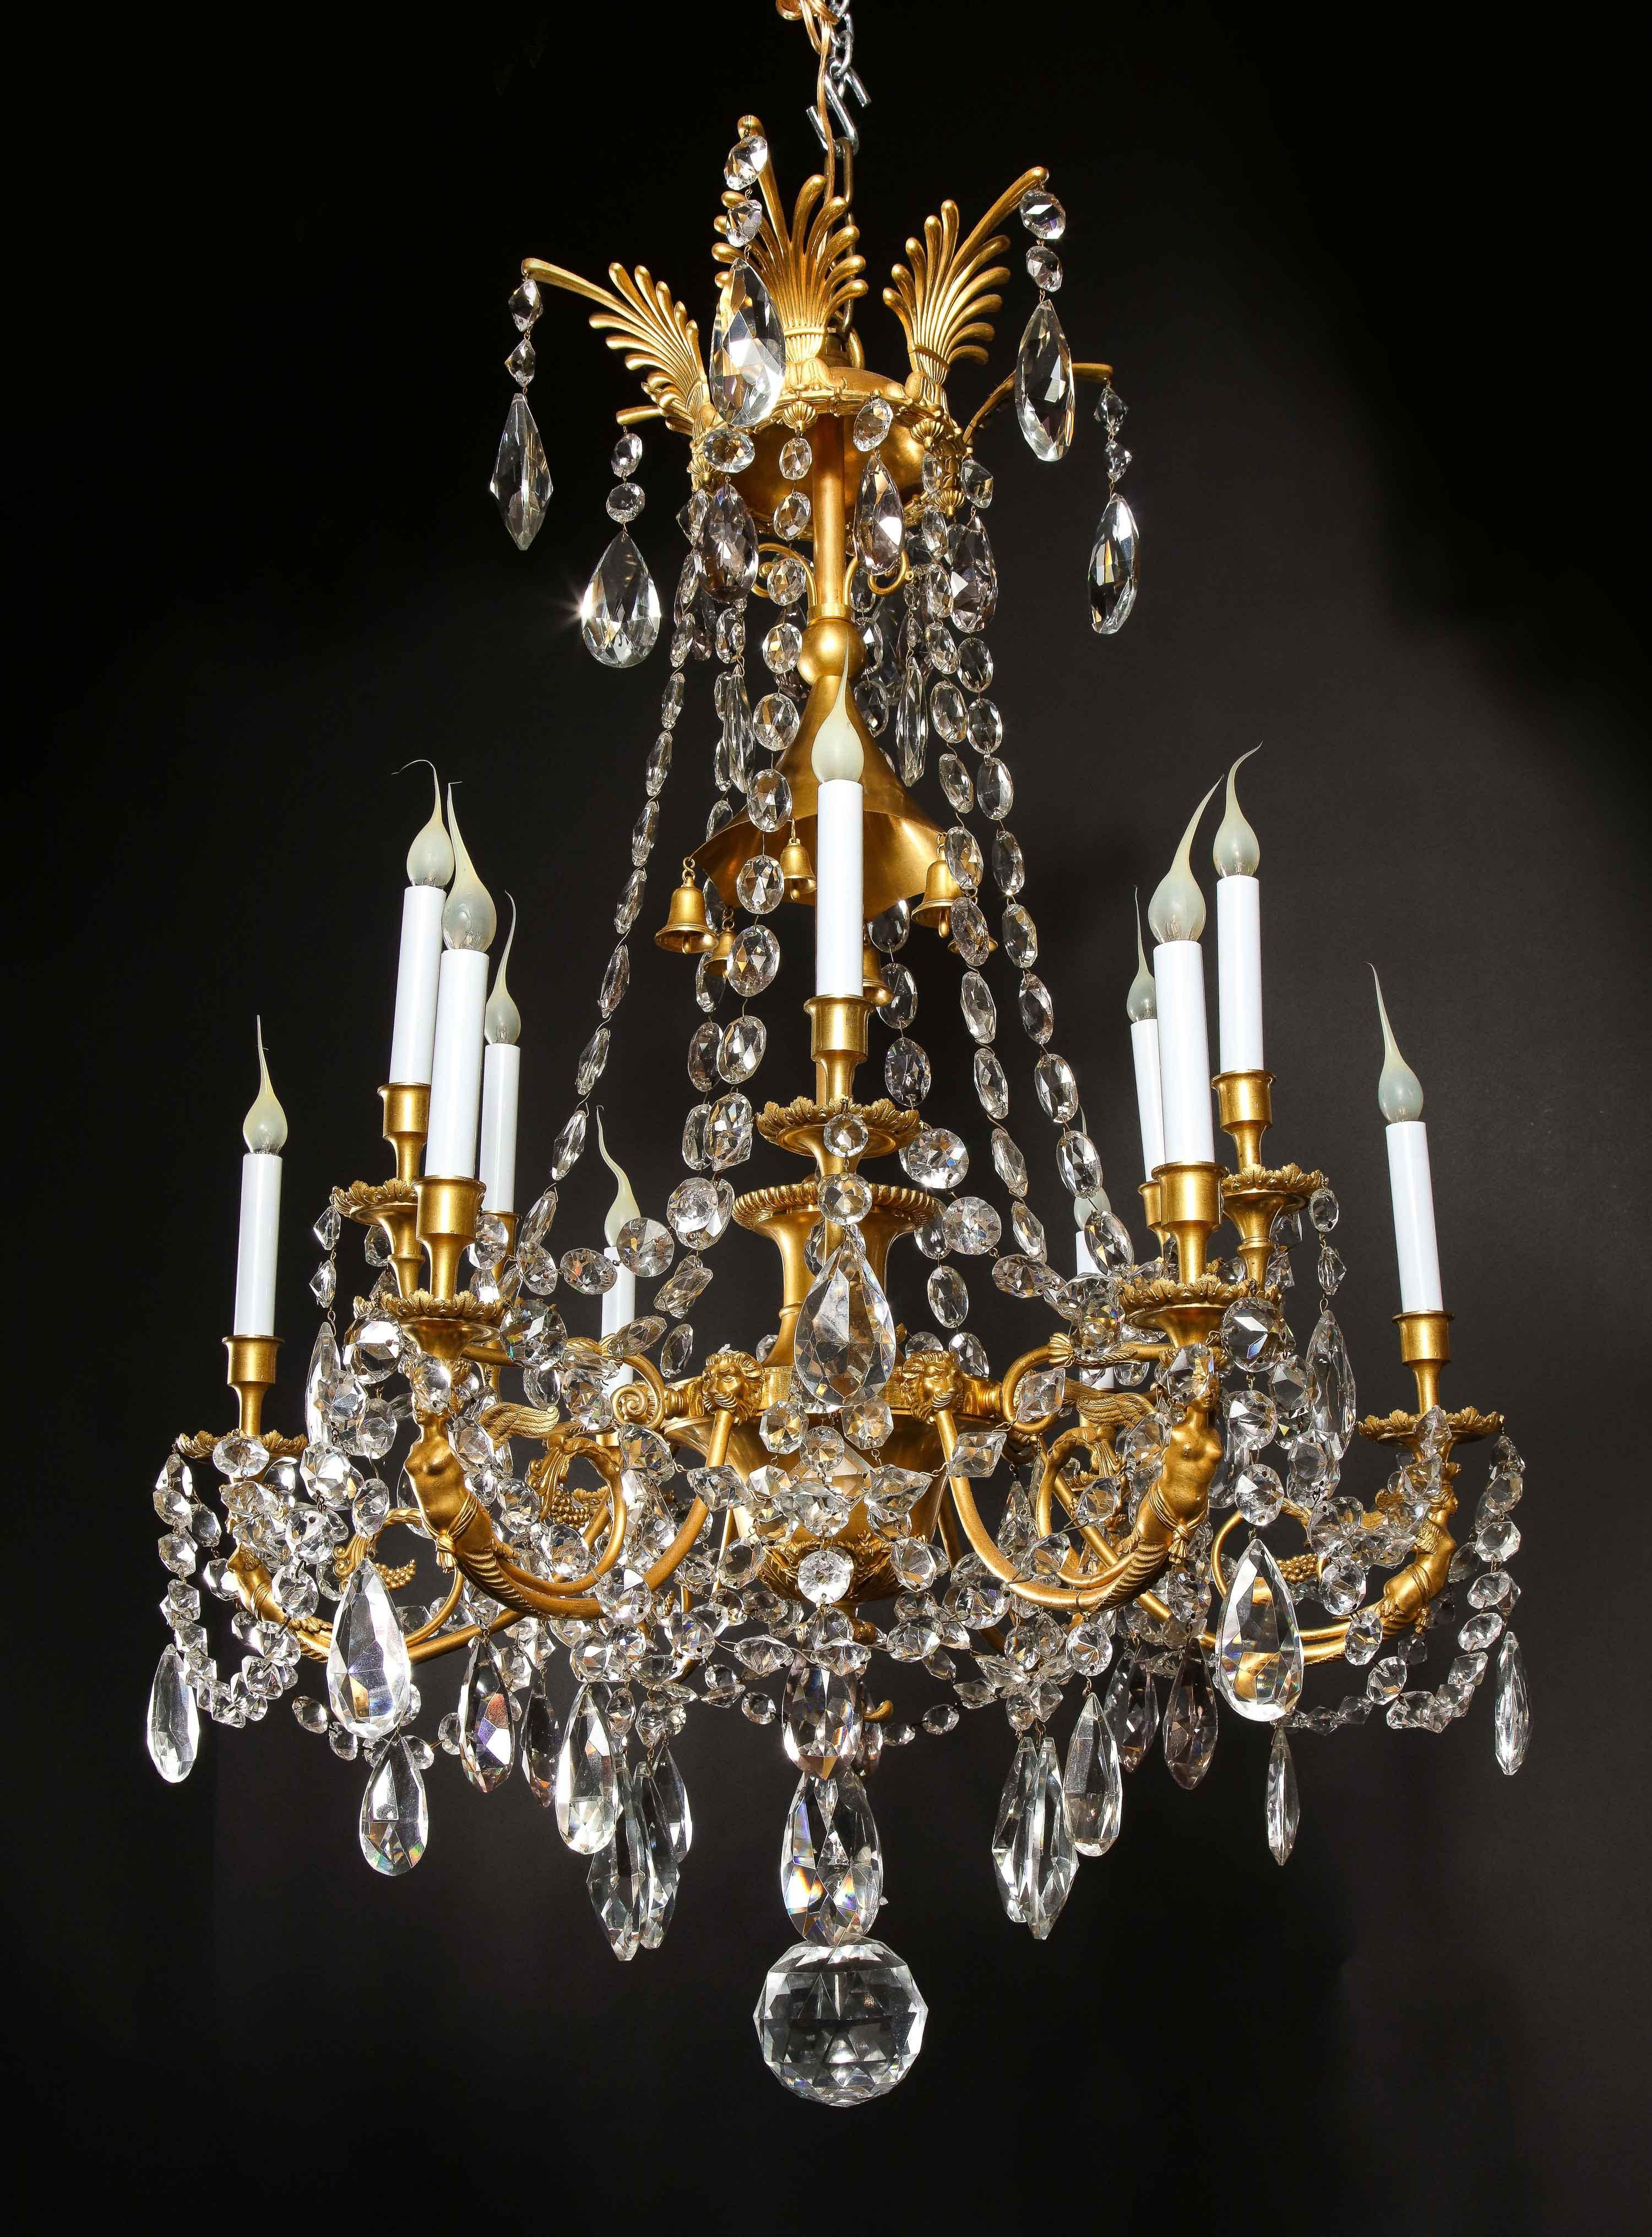 Spectacular Antique French Louis XVI Style Gilt Bronze and Crystal Chandelier For Sale 15